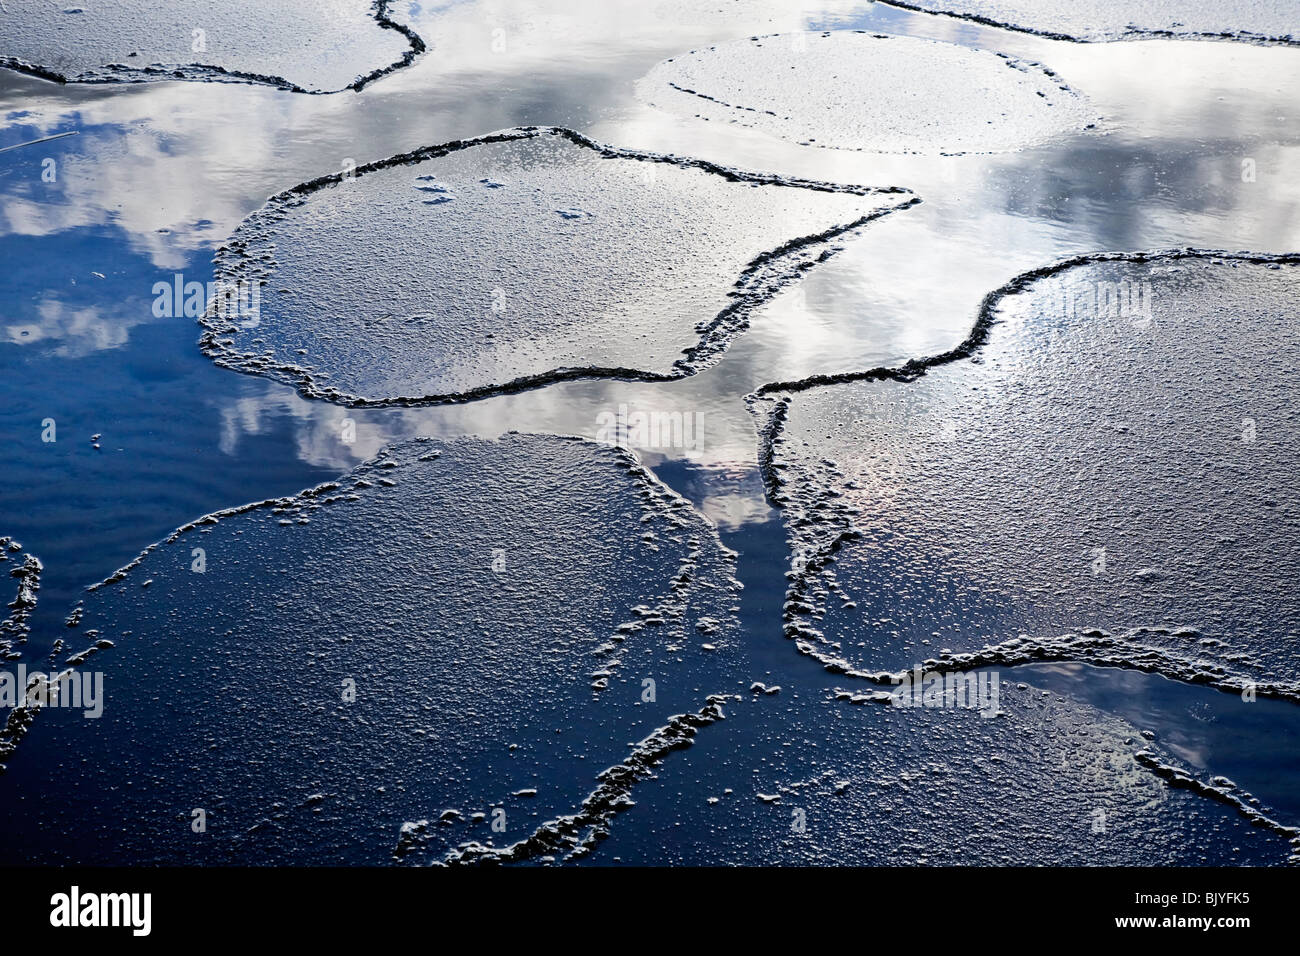 https://c8.alamy.com/comp/BJYFK5/thin-ice-breaking-on-a-spring-day-clouds-and-sky-reflected-in-the-BJYFK5.jpg